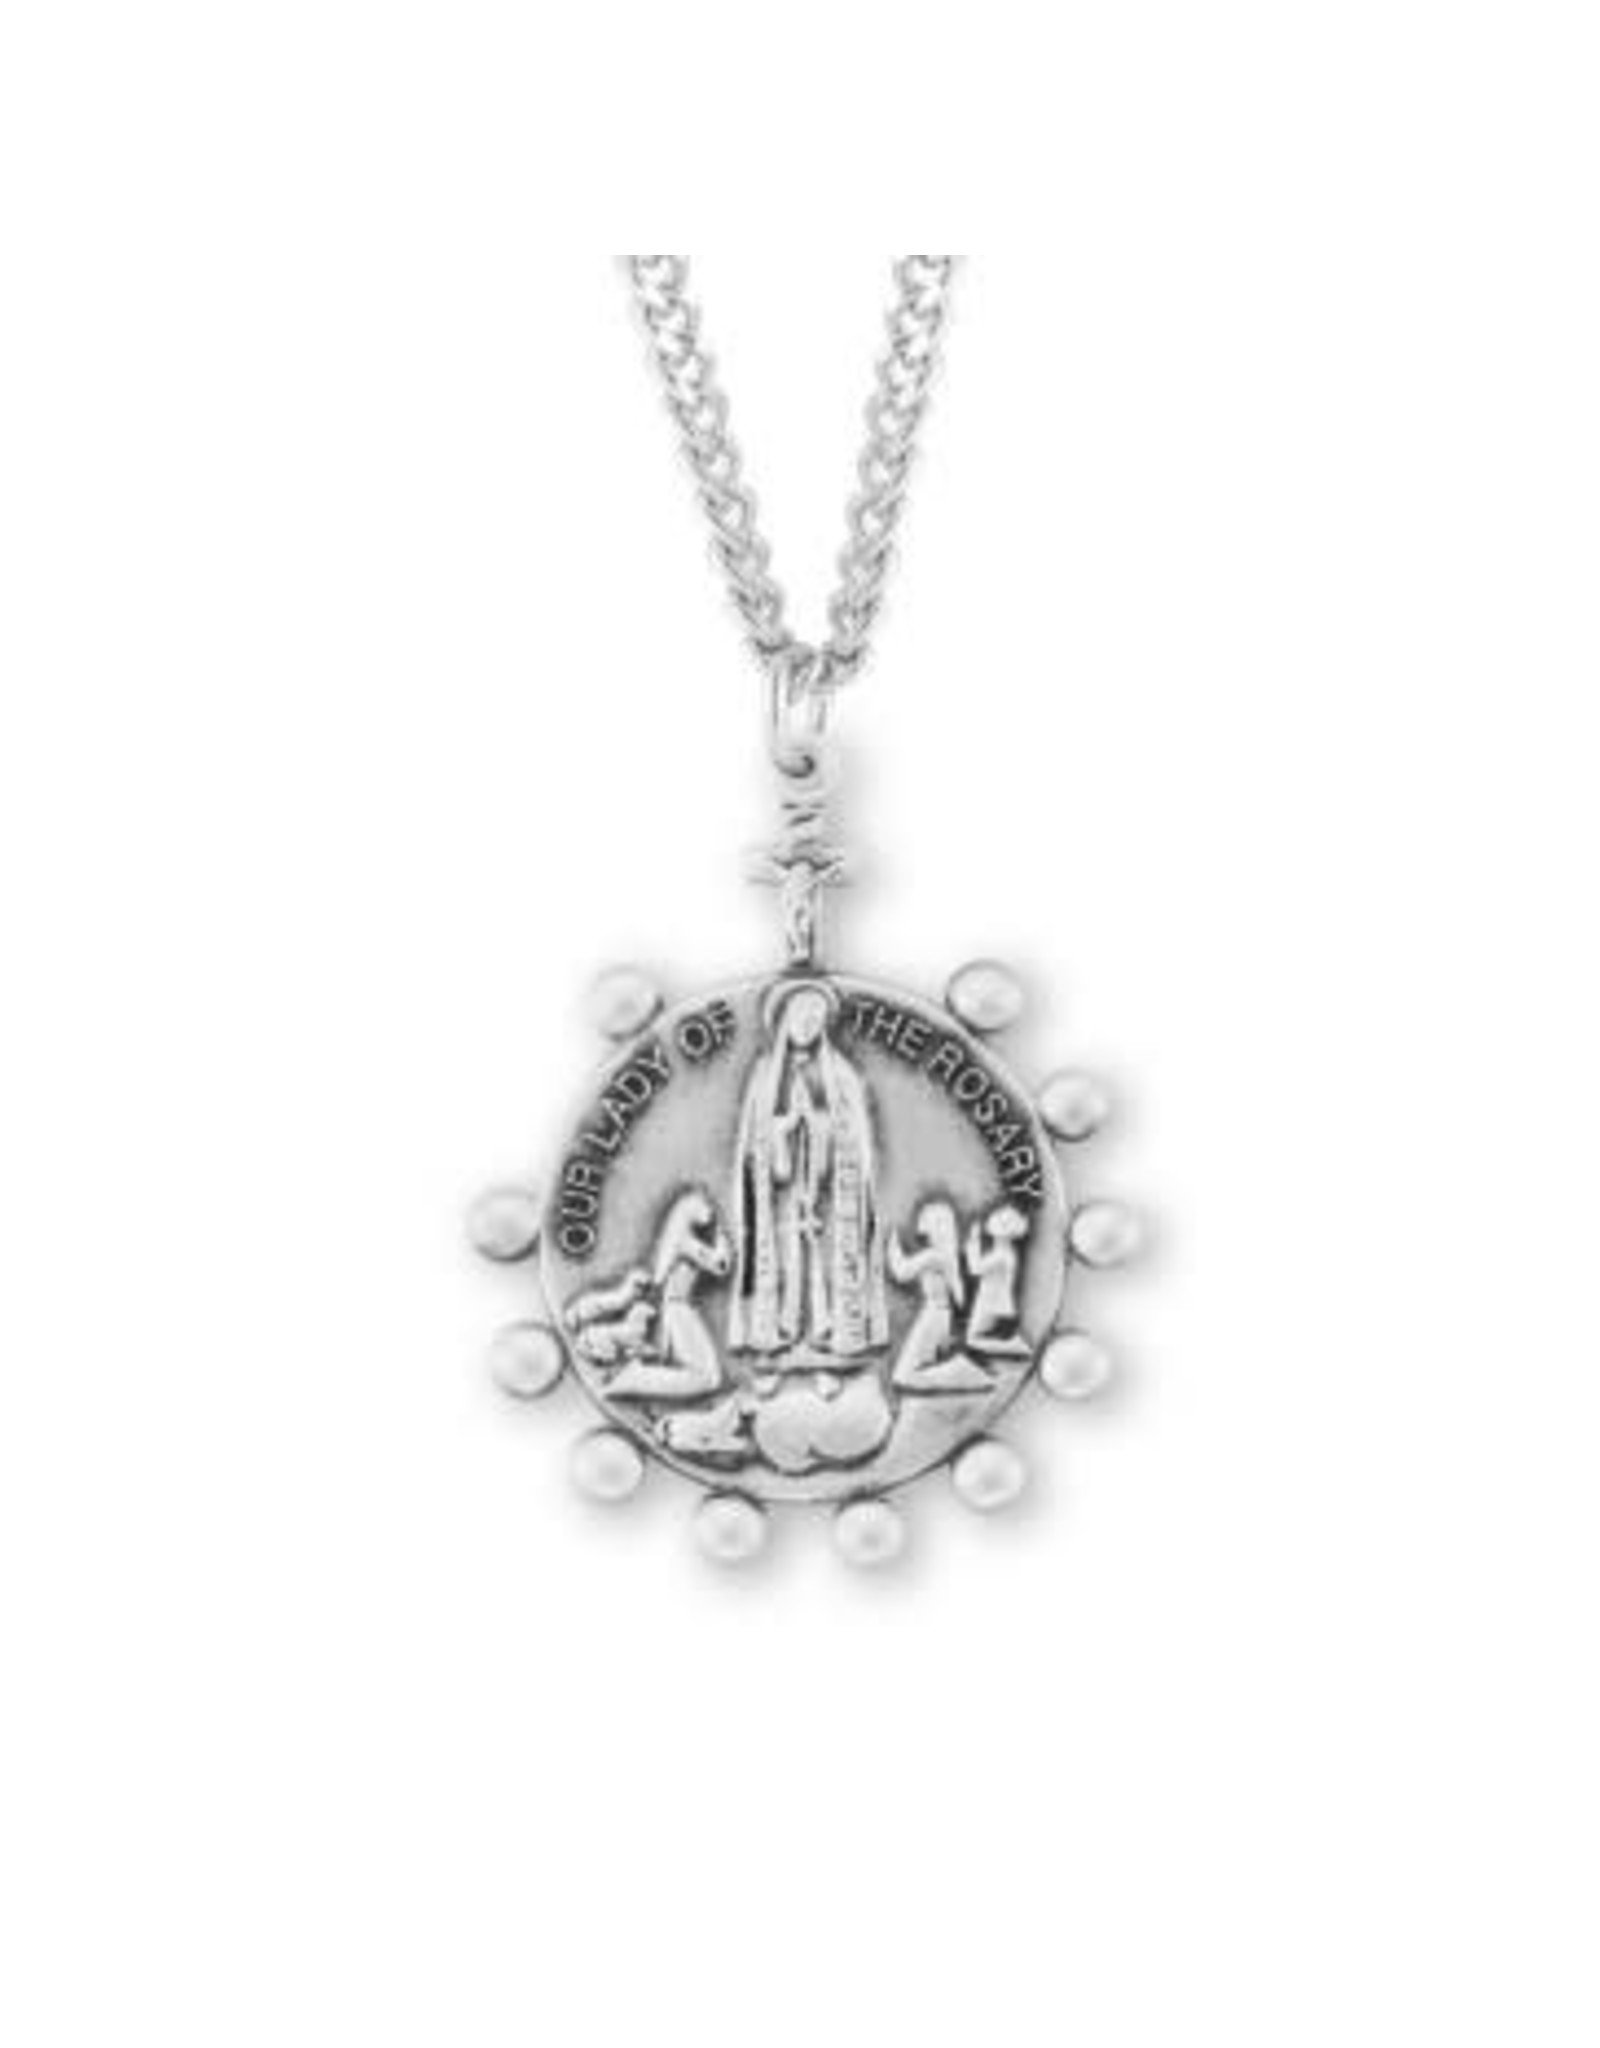 HMH Our Lady of the Rosary Round Medal - Sterling Silver on 24" Chain